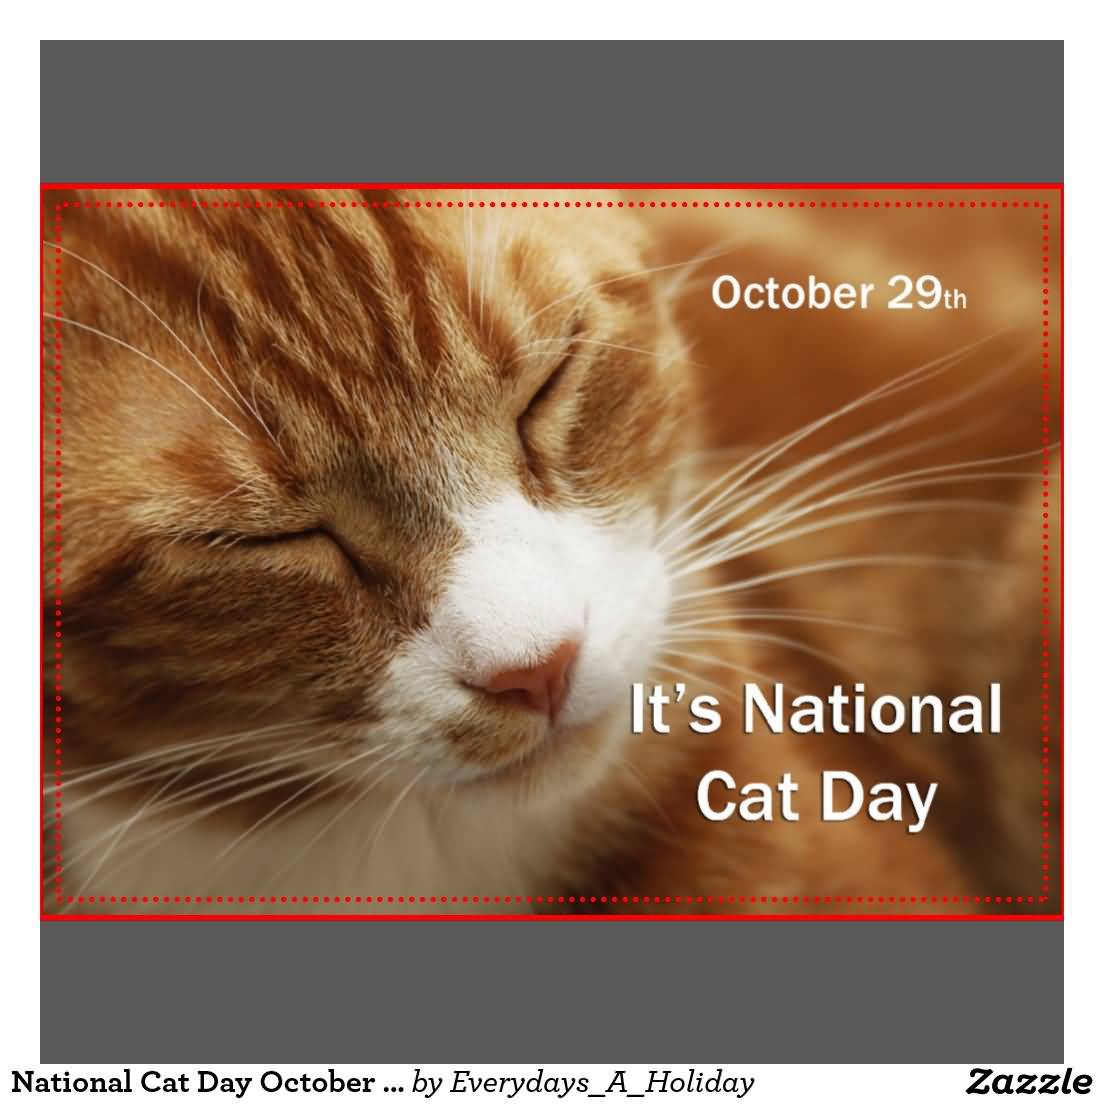 October 29th It's National Cat Day Greeting Card